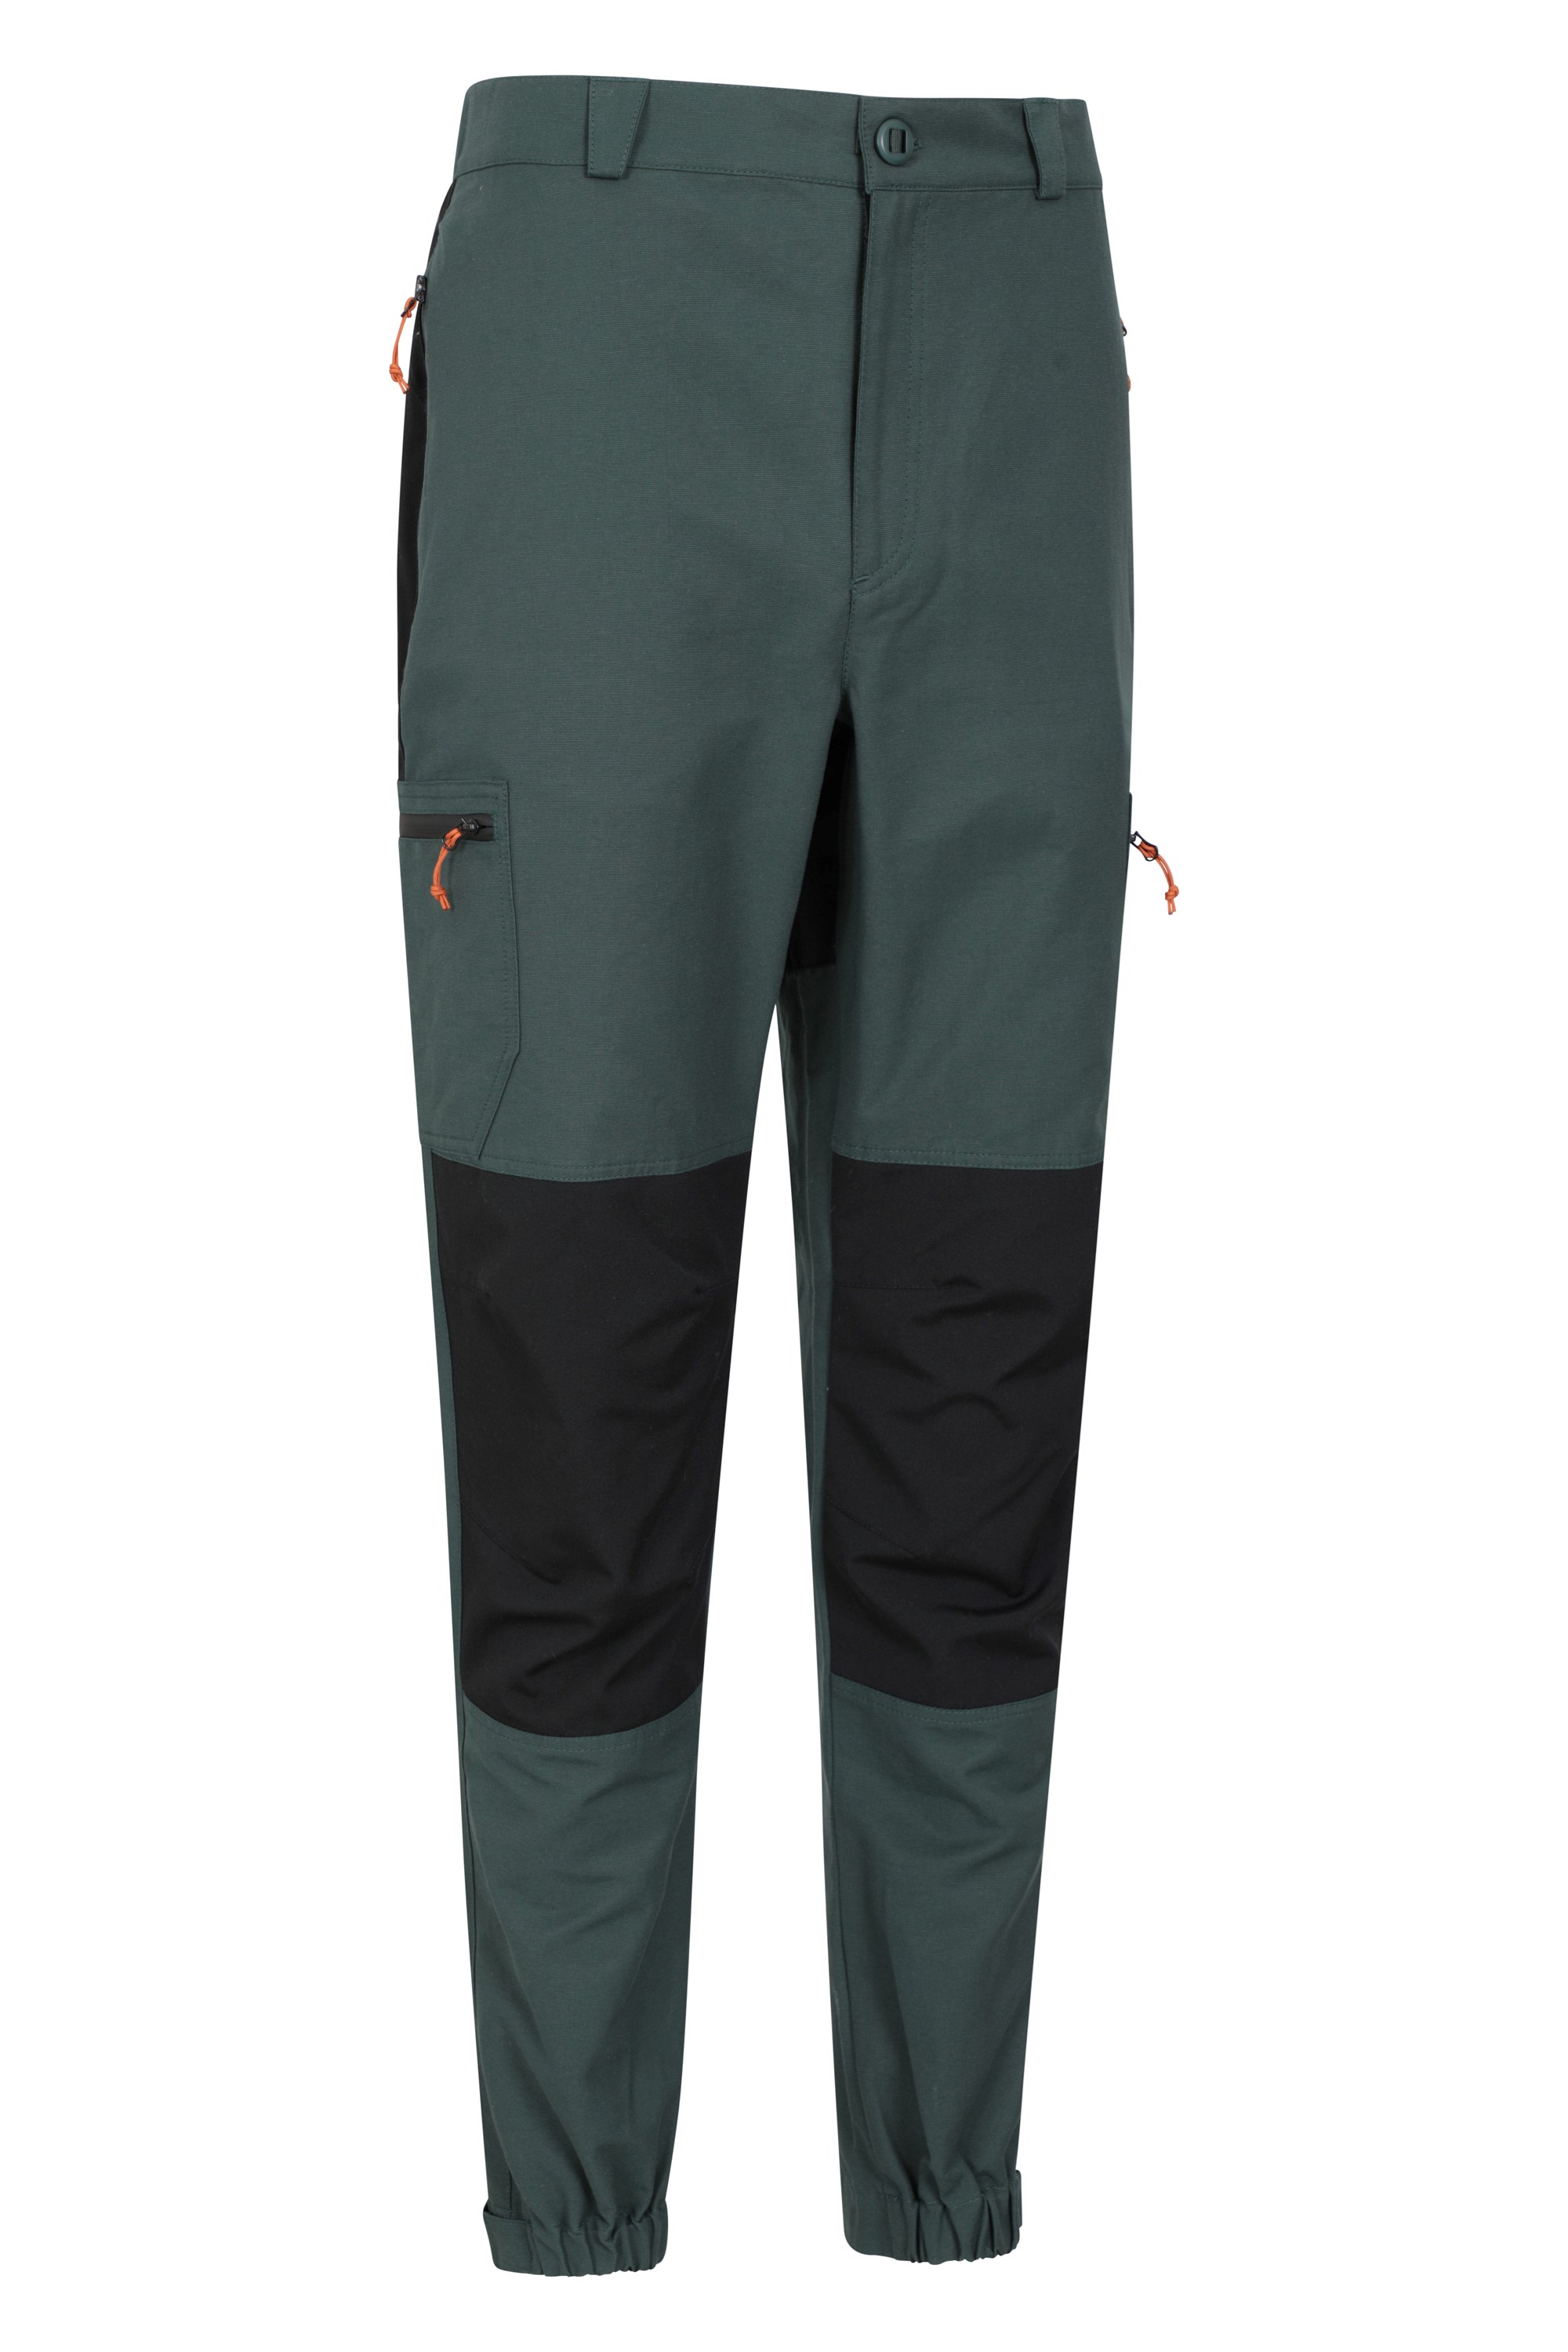 Shop Mountain Warehouse Walking Trousers up to 85 Off  DealDoodle